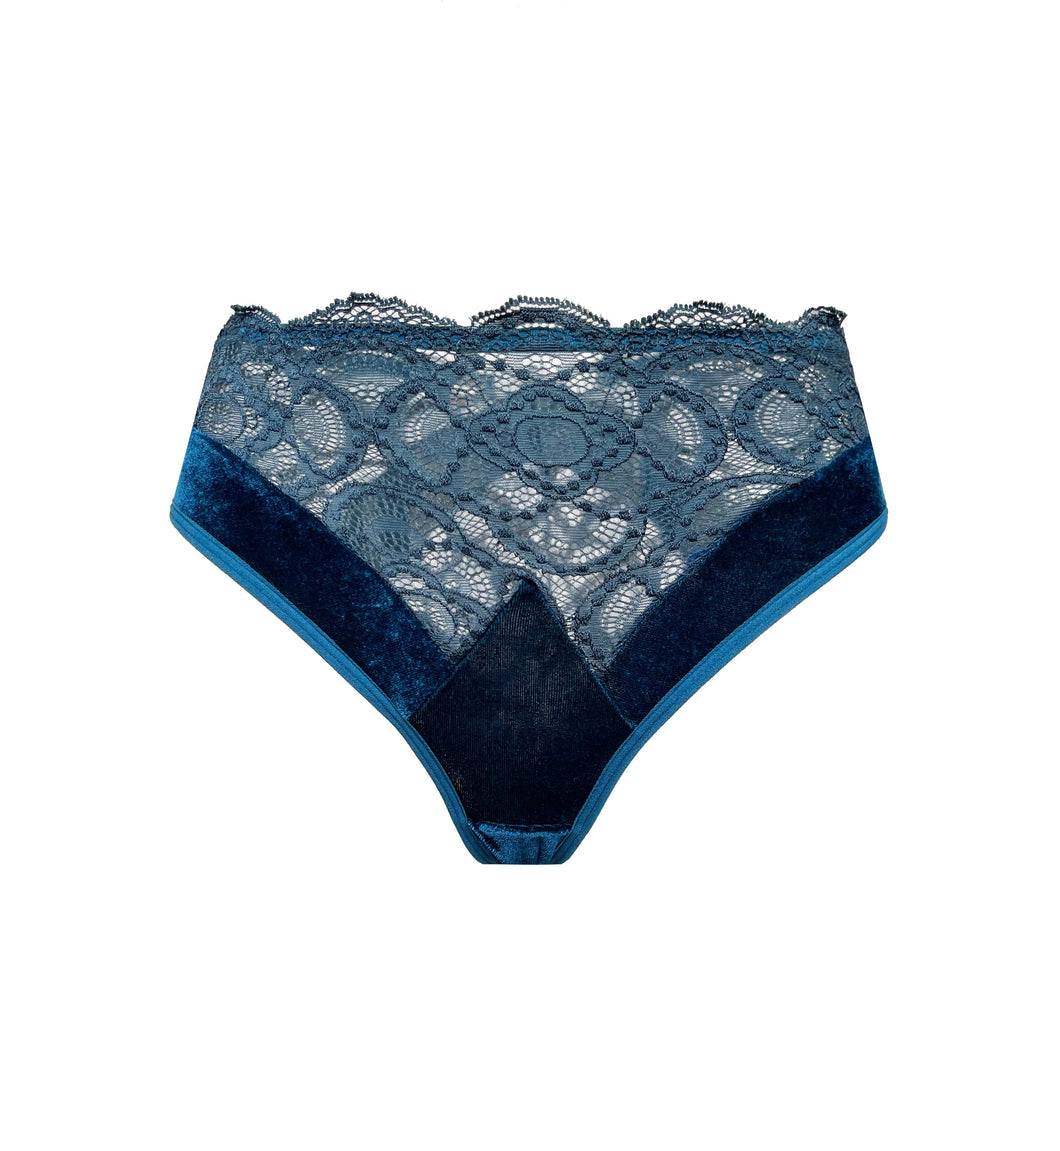 Pomegranate Love Velvet and Lace Panties